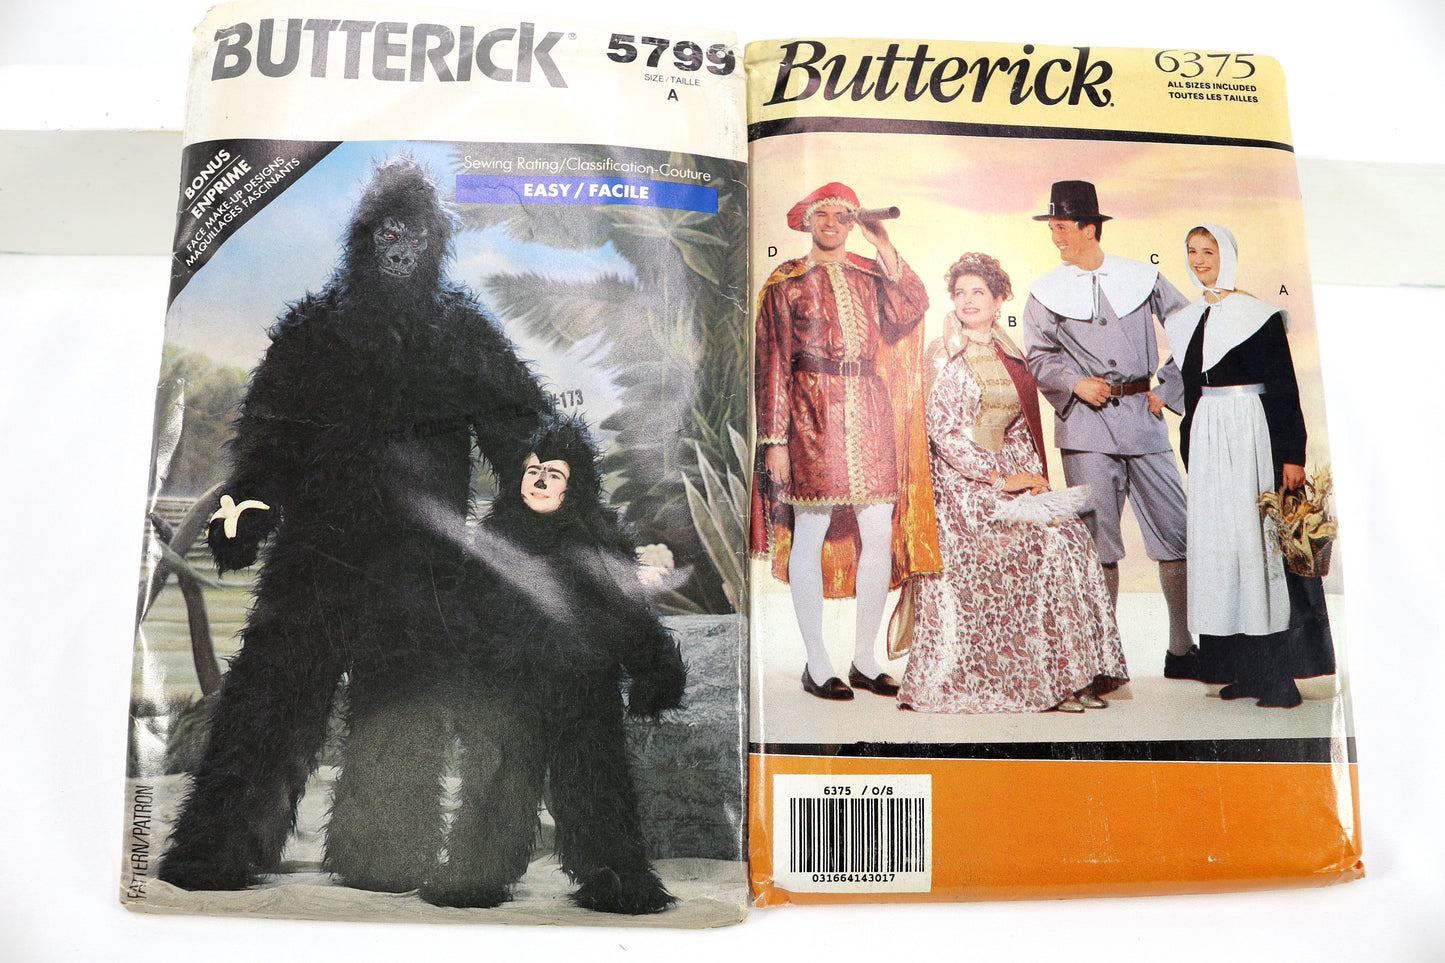 Butterick 5799 Gorilla Costume Sewing Pattern or Butterick 6375 Pilgrim Costume Sewing Pattern